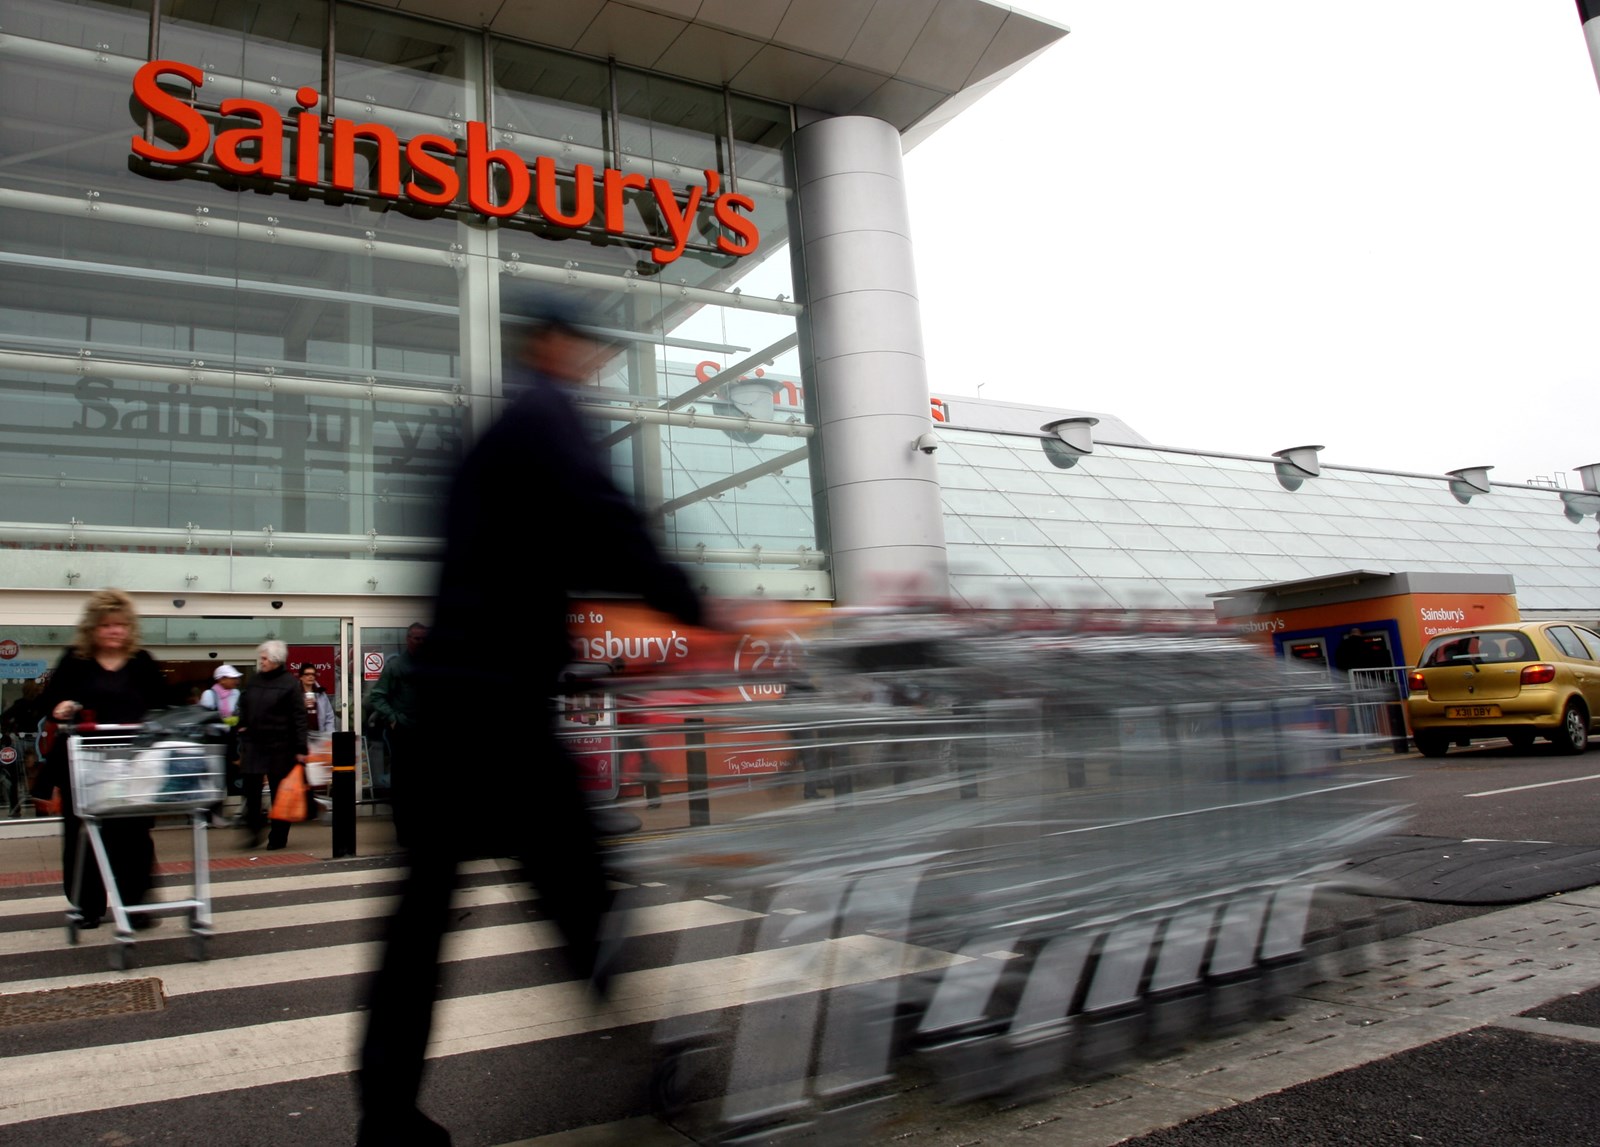 Sainsbury's Declared UK's Most Socially Influential Retail Brand